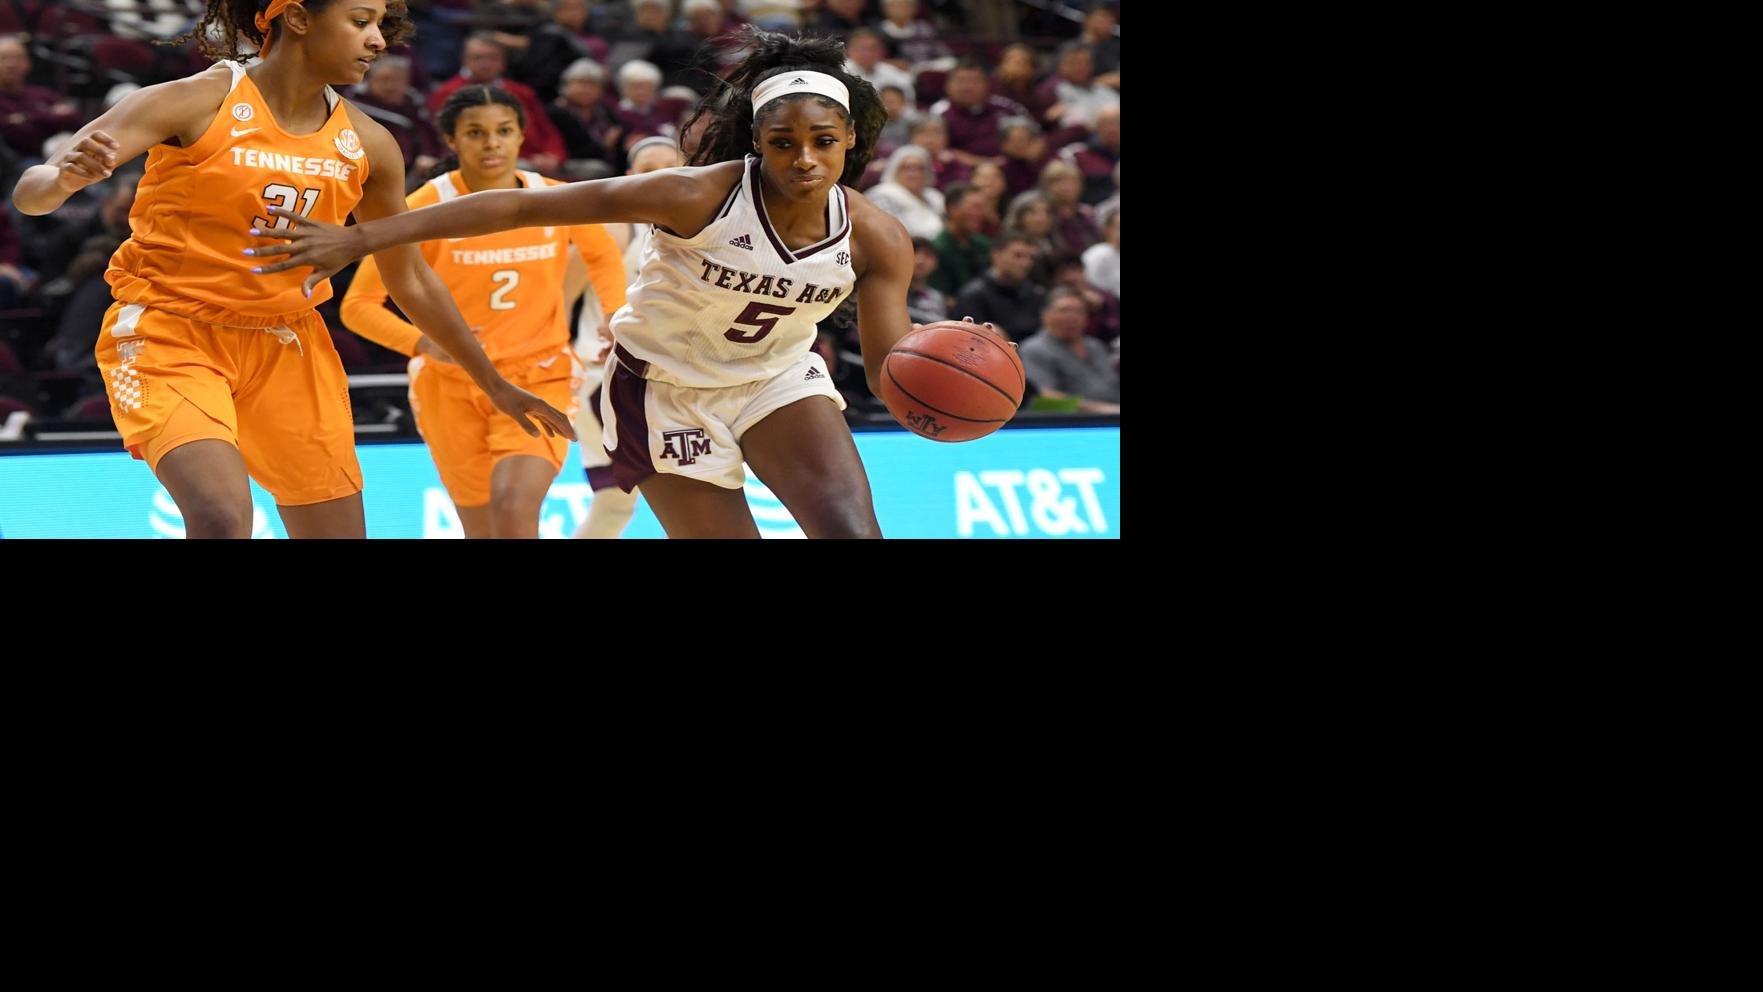 Texas A&M vs. Tennessee women's basketball Gallery